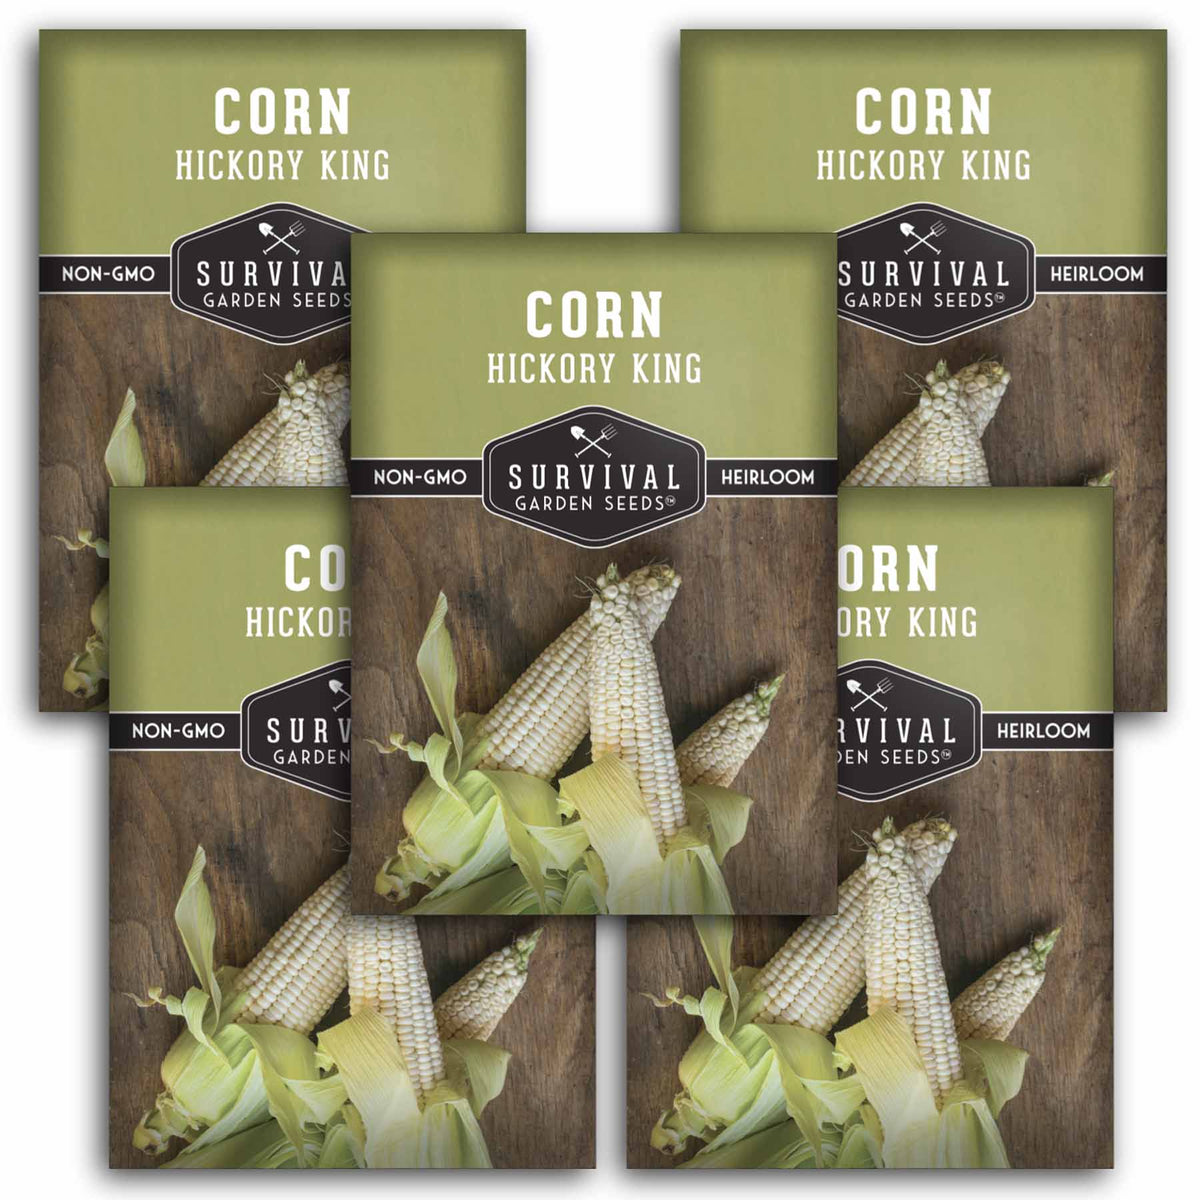 5 packets of Hickory King Corn seeds